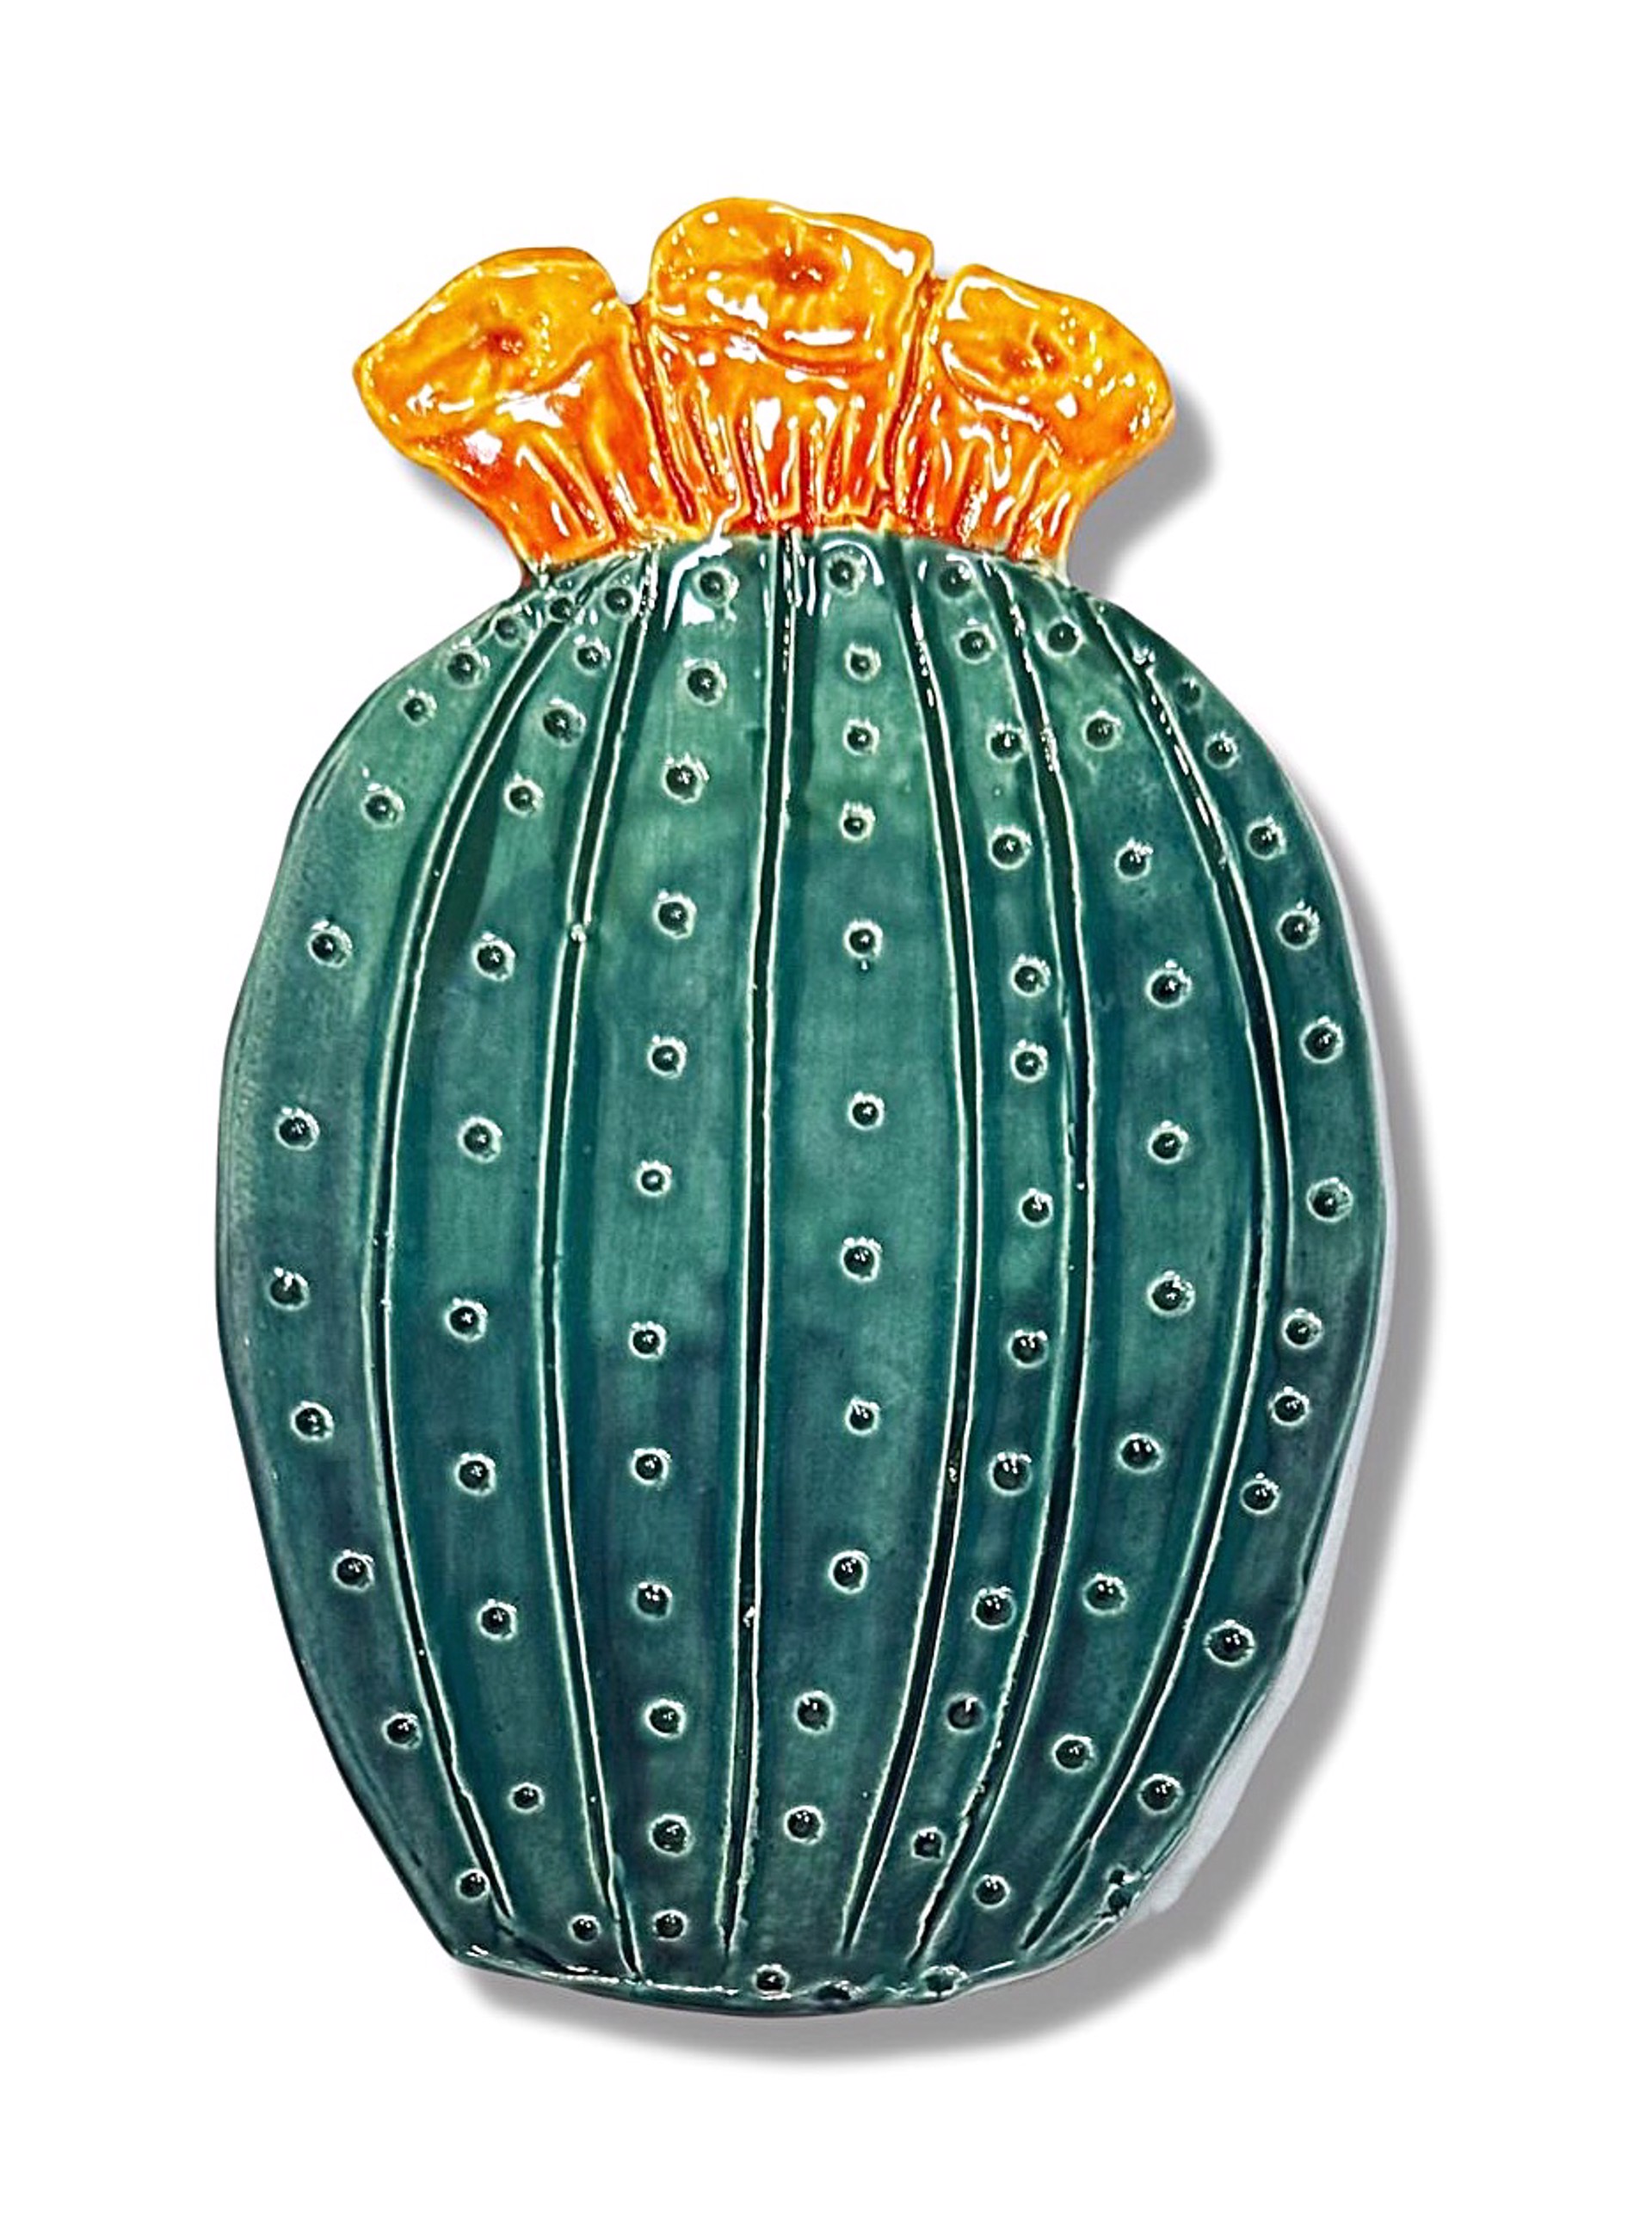 Long Barrel Cactus Spoon Rest: Teal and Orange by Robin Chlad